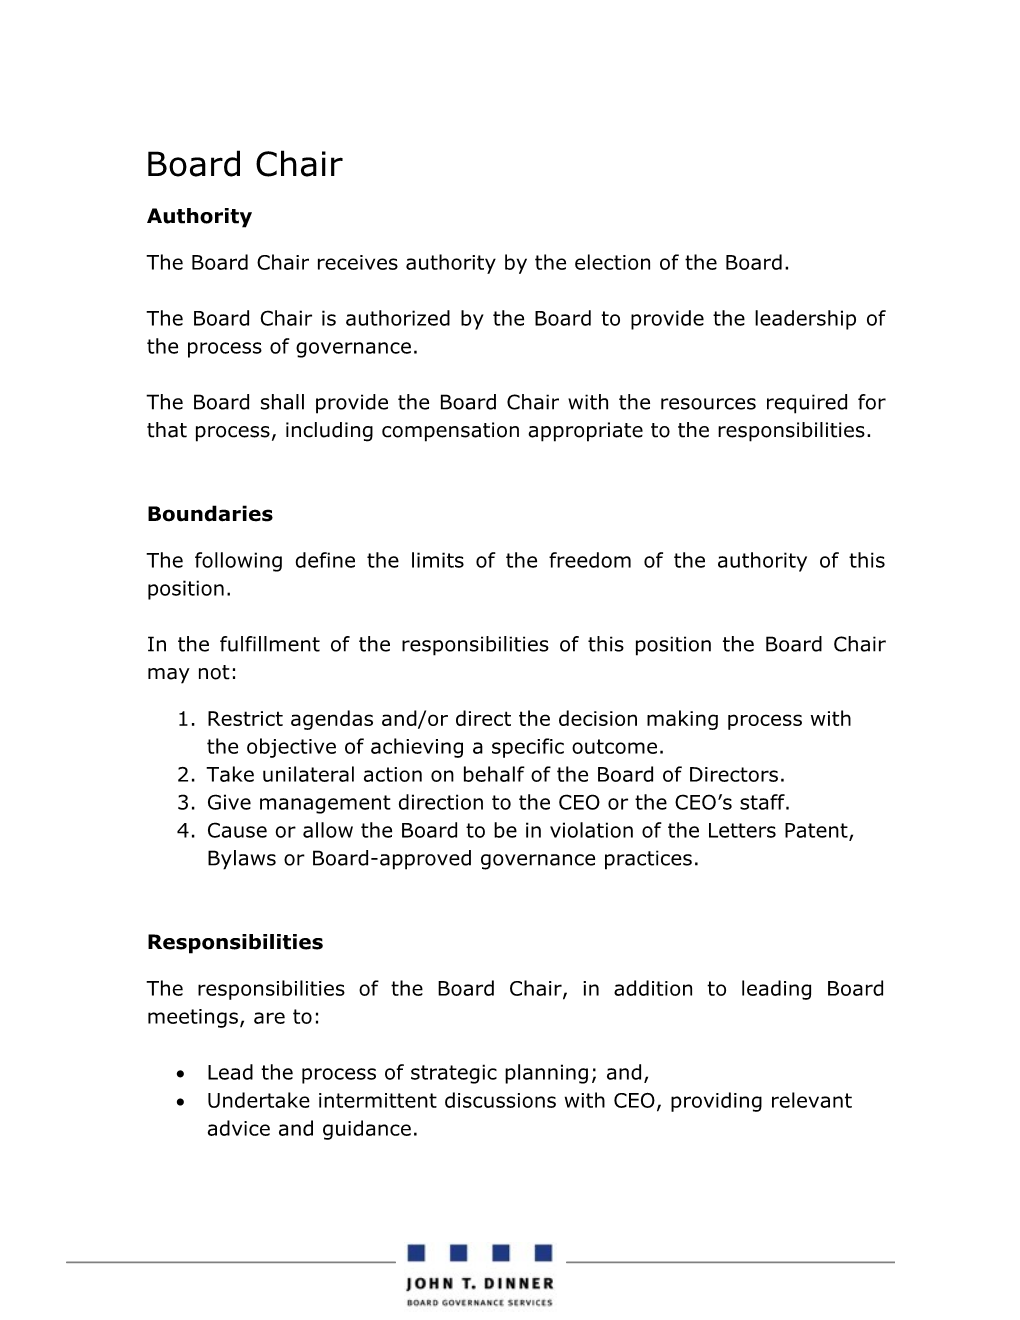 The Board Chair Receives Authority by the Election of the Board